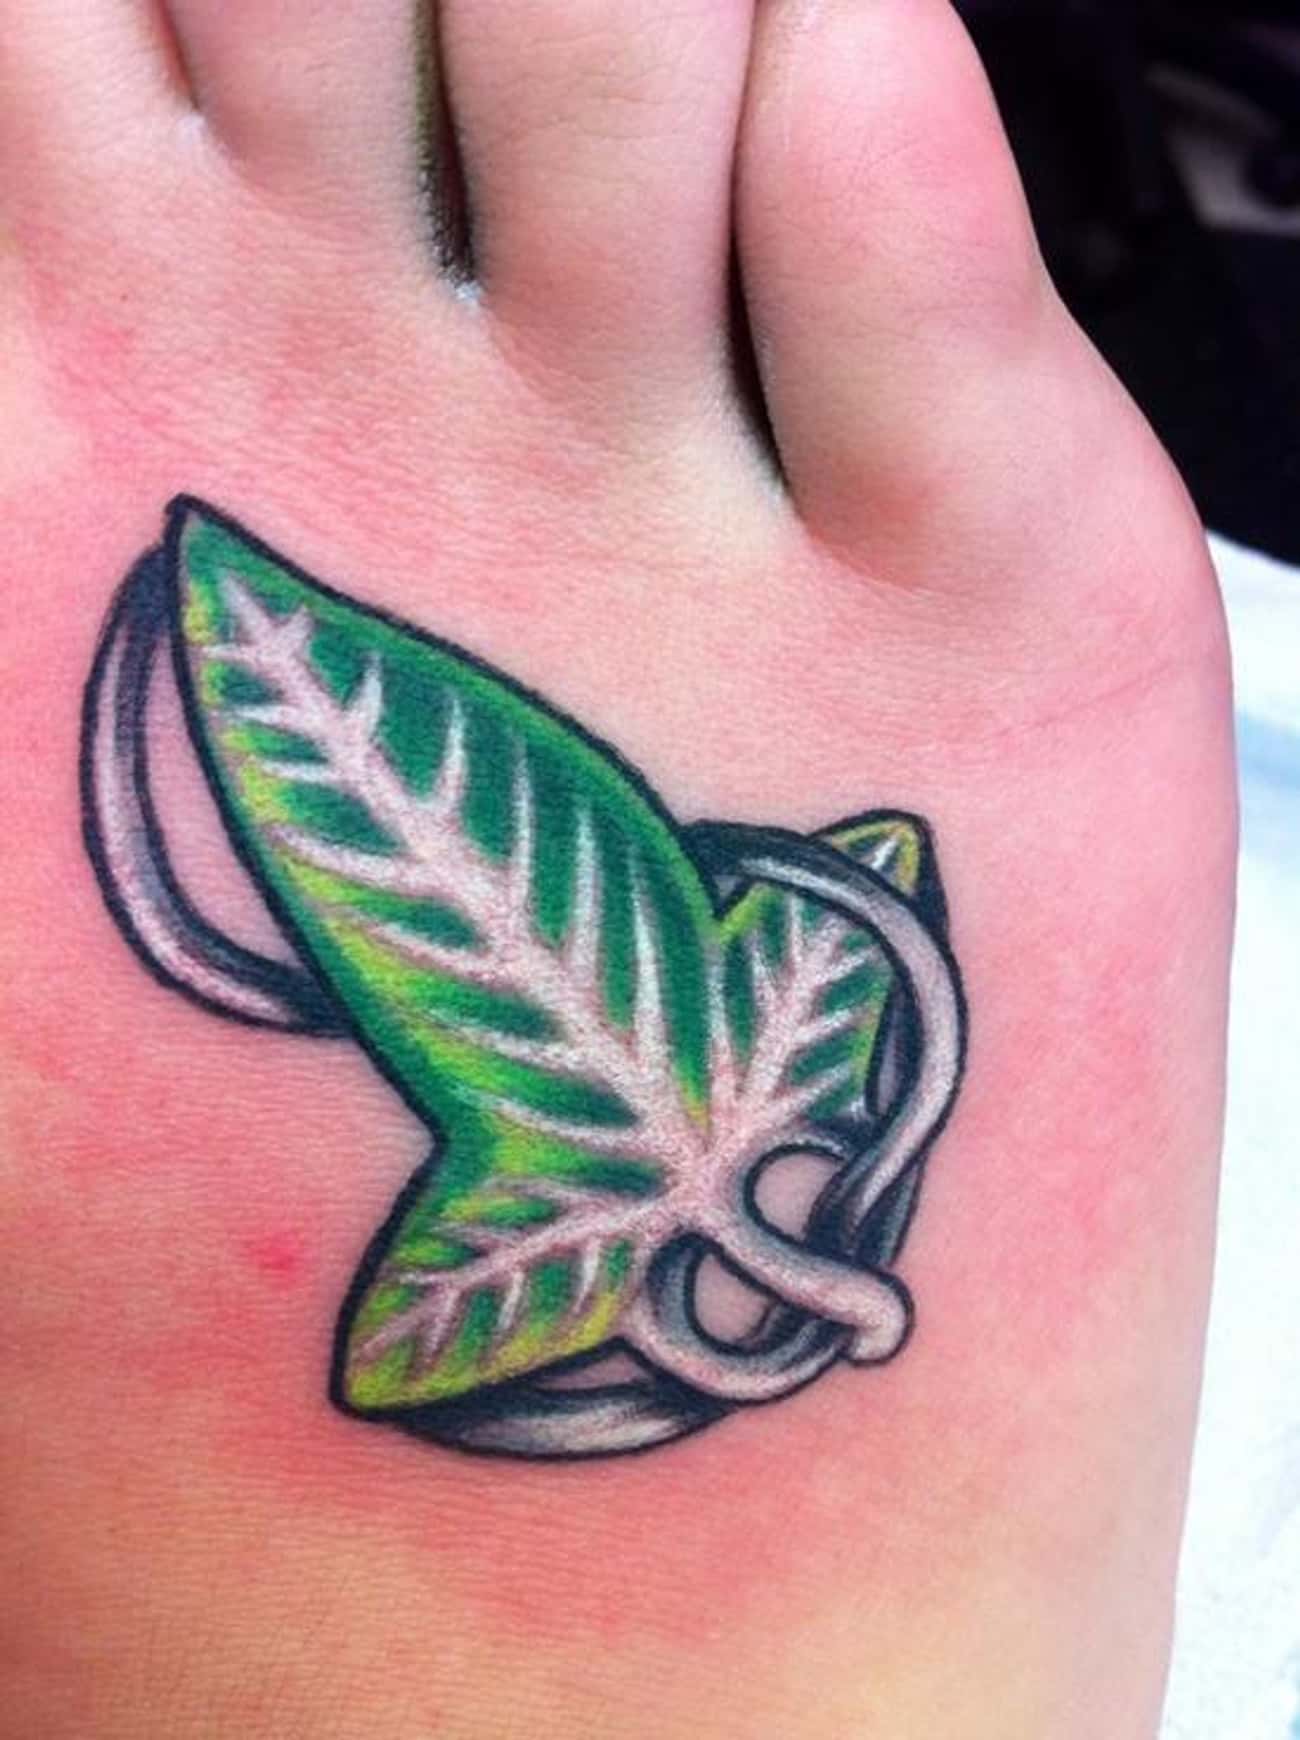 Subtle Small Foot Tattoo is Great Protection